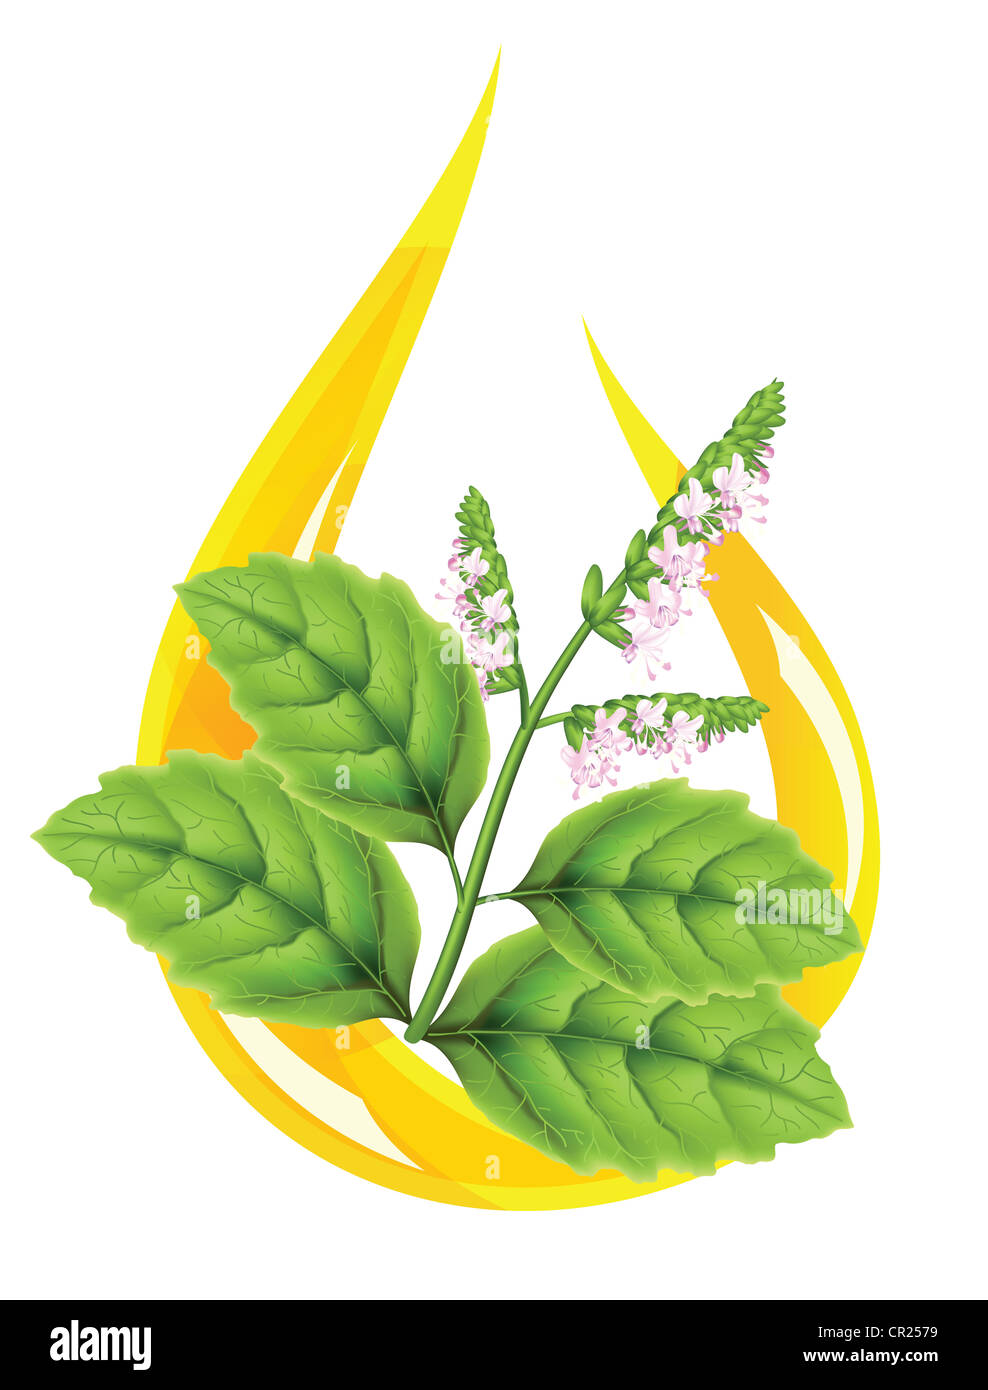 Essential oil of patchouli (Pogostemon cablini). Stylized drop. Stock Photo